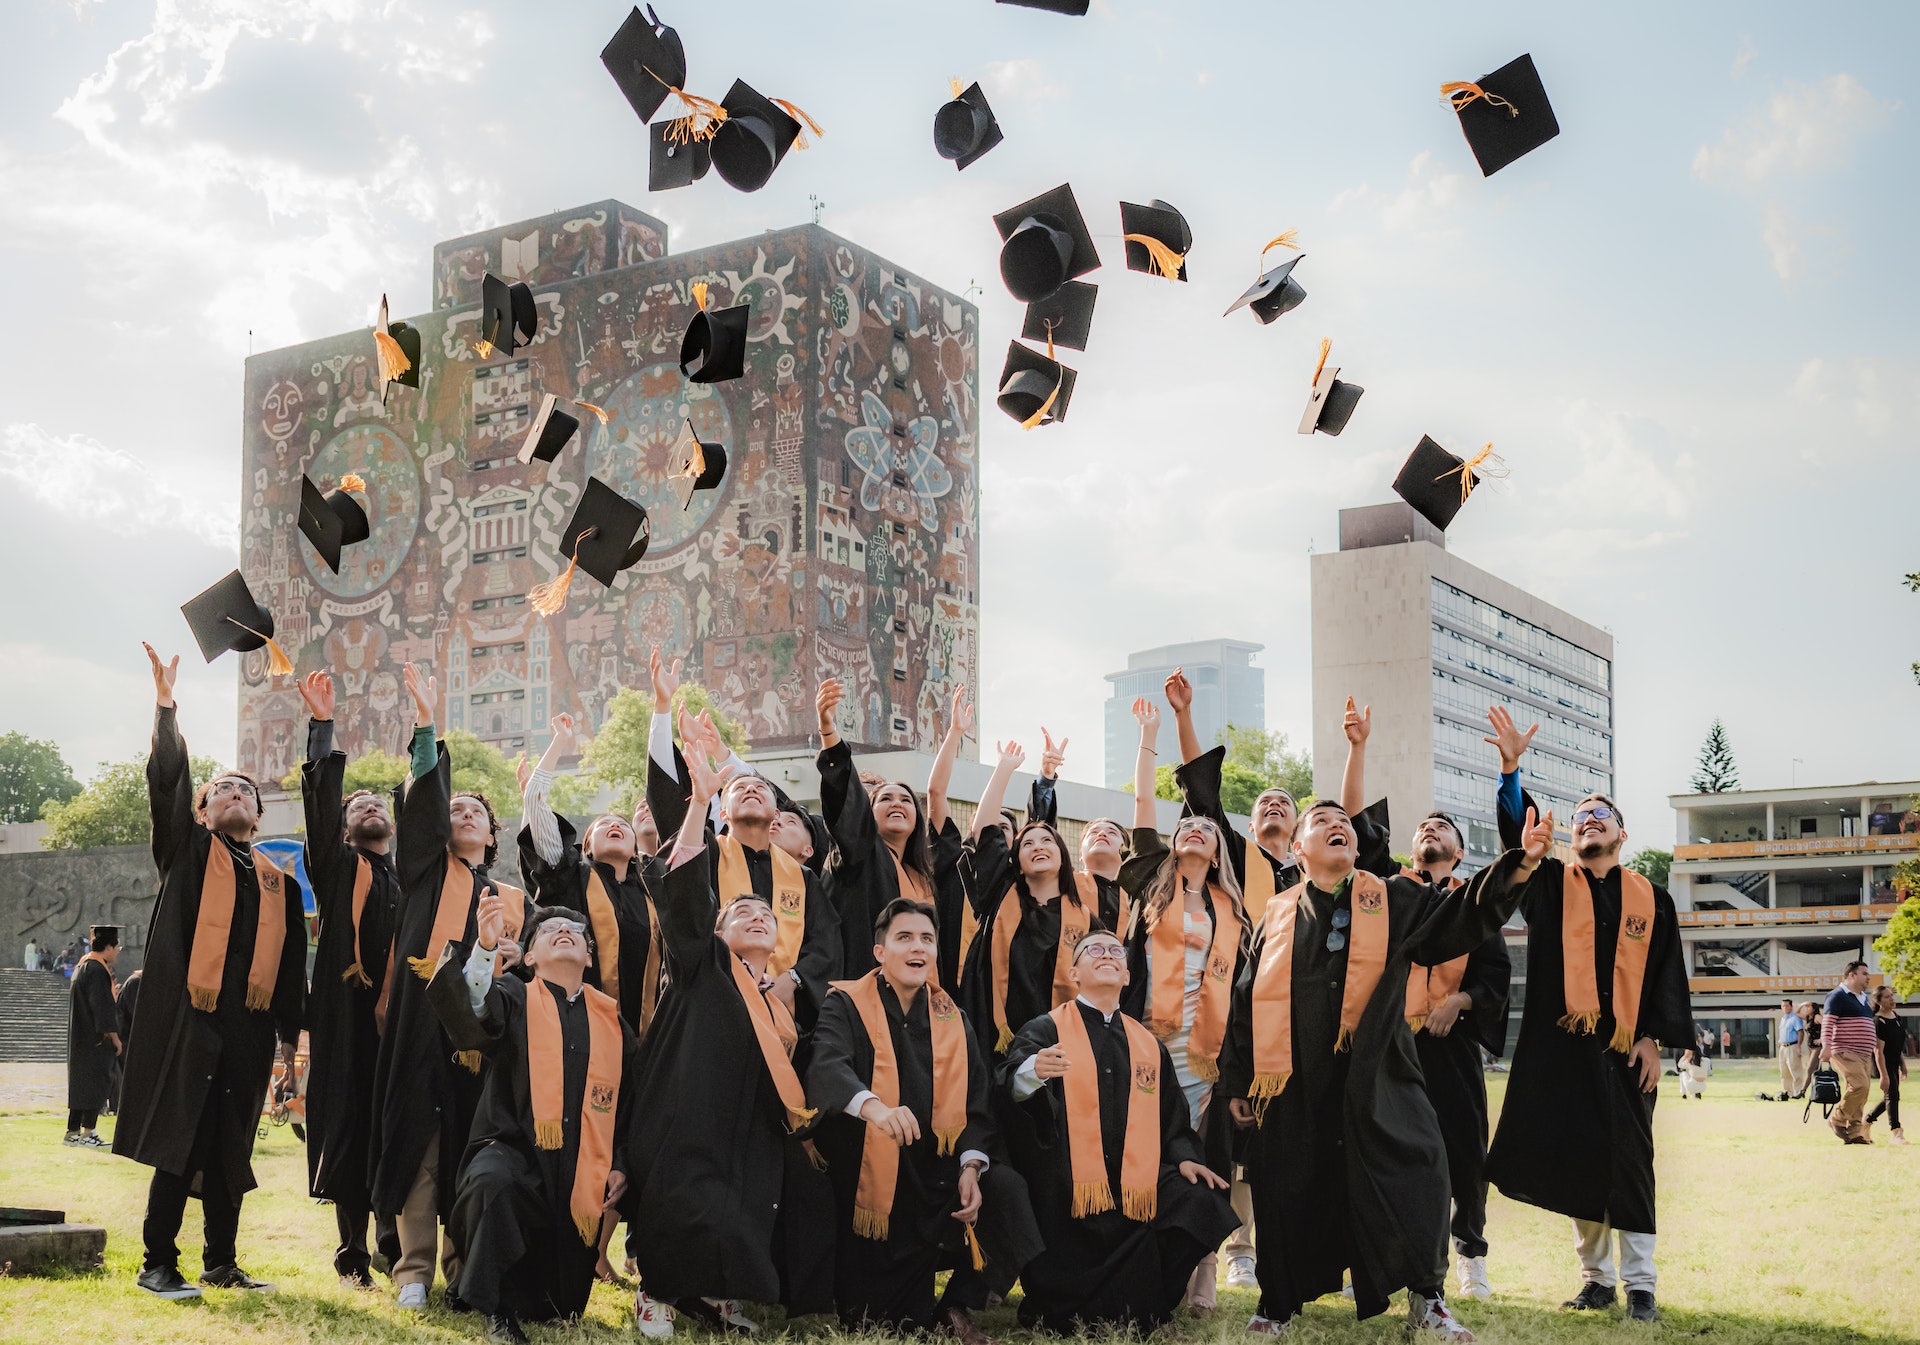 Photo by Ulises Peña: https://www.pexels.com/photo/smiling-graduates-throwing-up-academic-hats-near-unam-central-library-building-17615704/